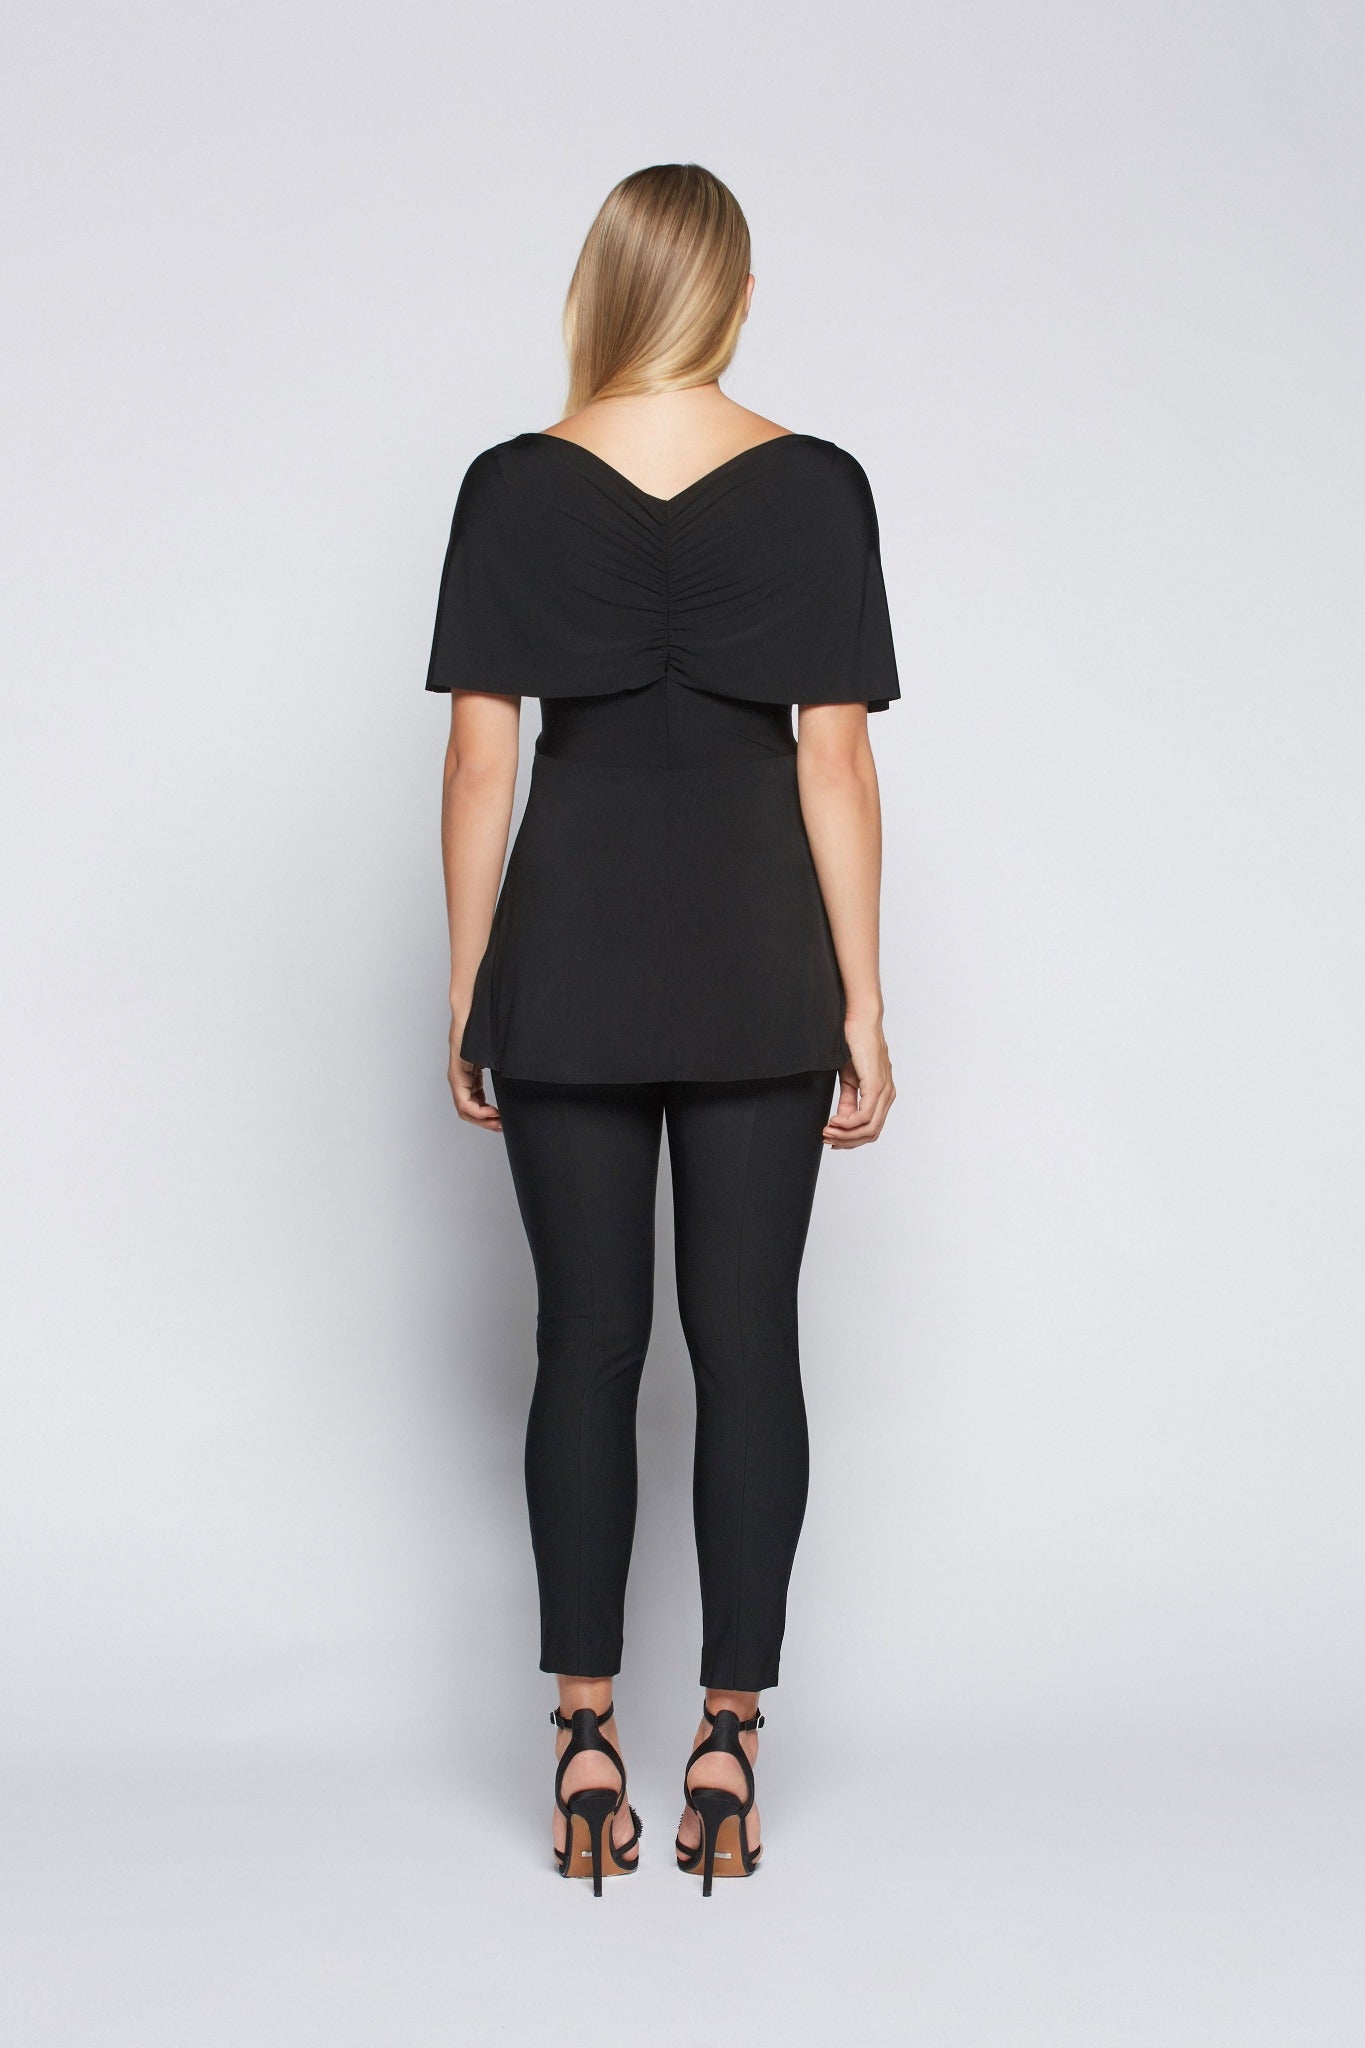 Back view of a woman wearing a fuller bust low cut v-neck top with a butterfly twist detail at the empire waist in black stretch viscose jersey by Miriam Baker.